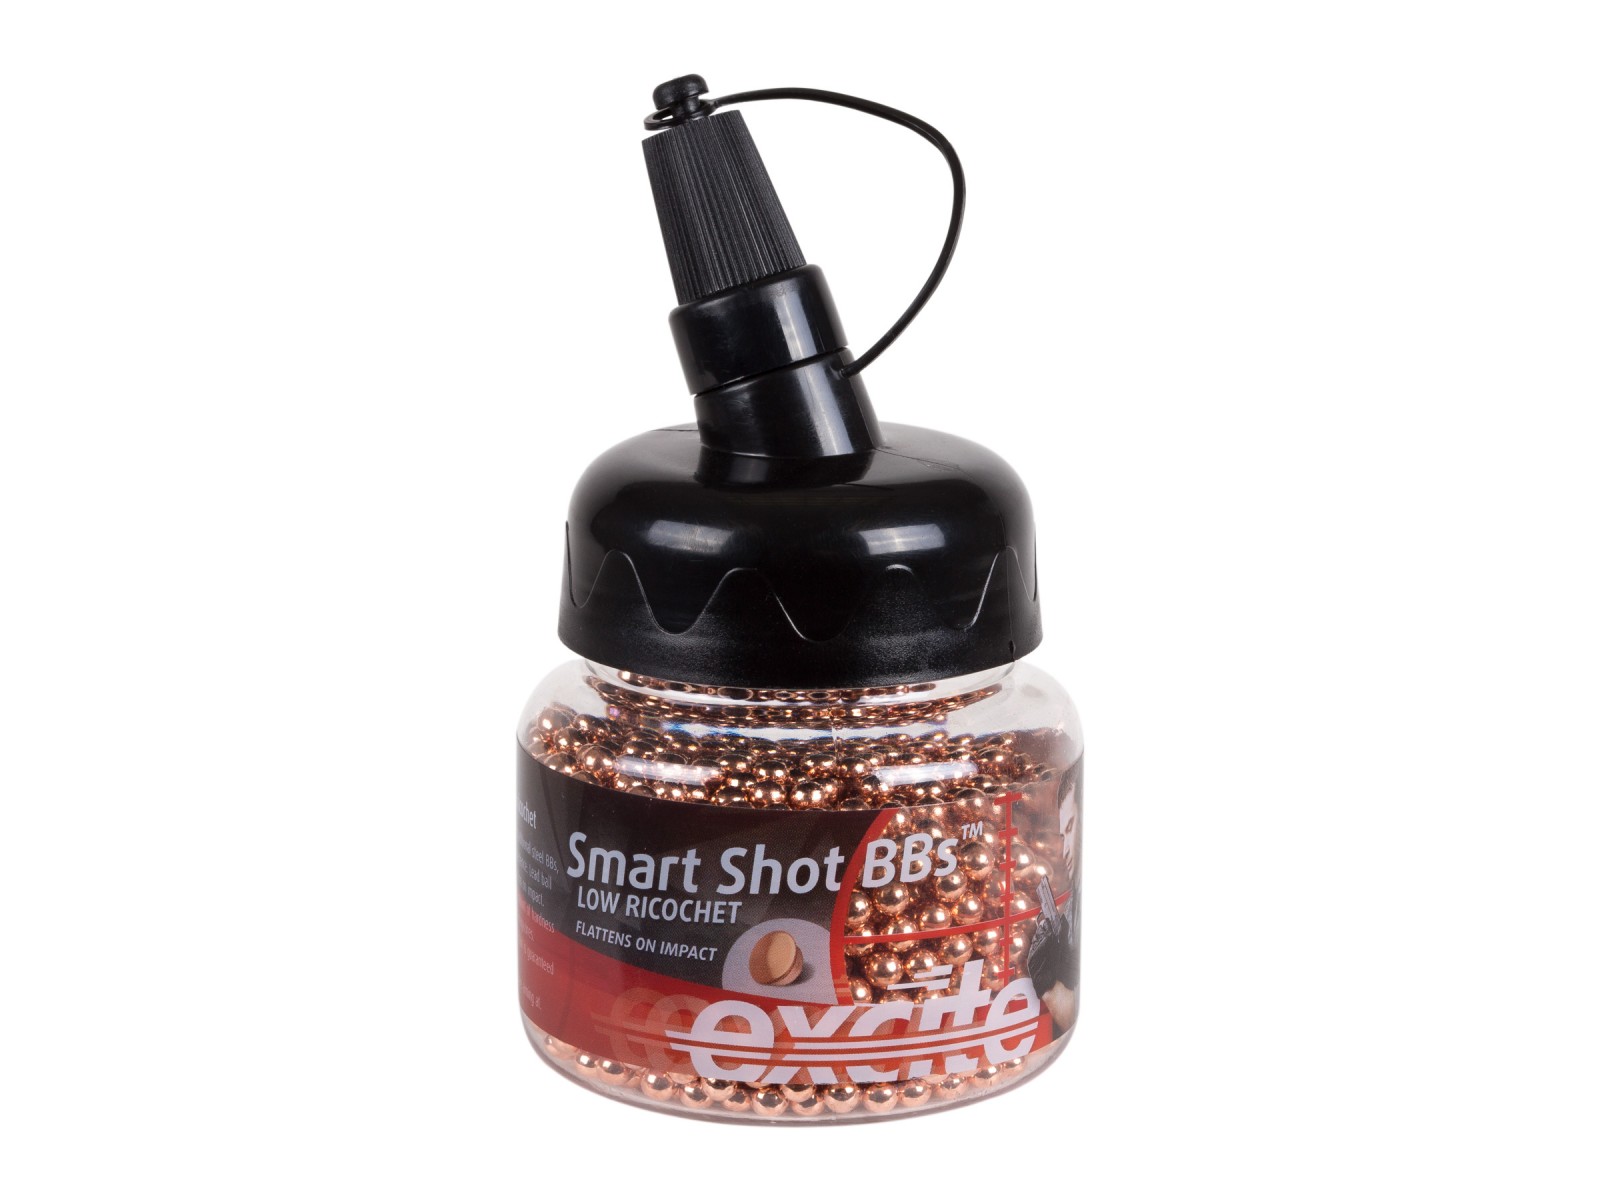 H&N Excite Smart Shot BB Bottle, .177 Cal, 7.4 Grains, Copper Plated Lead BBs, 1500ct